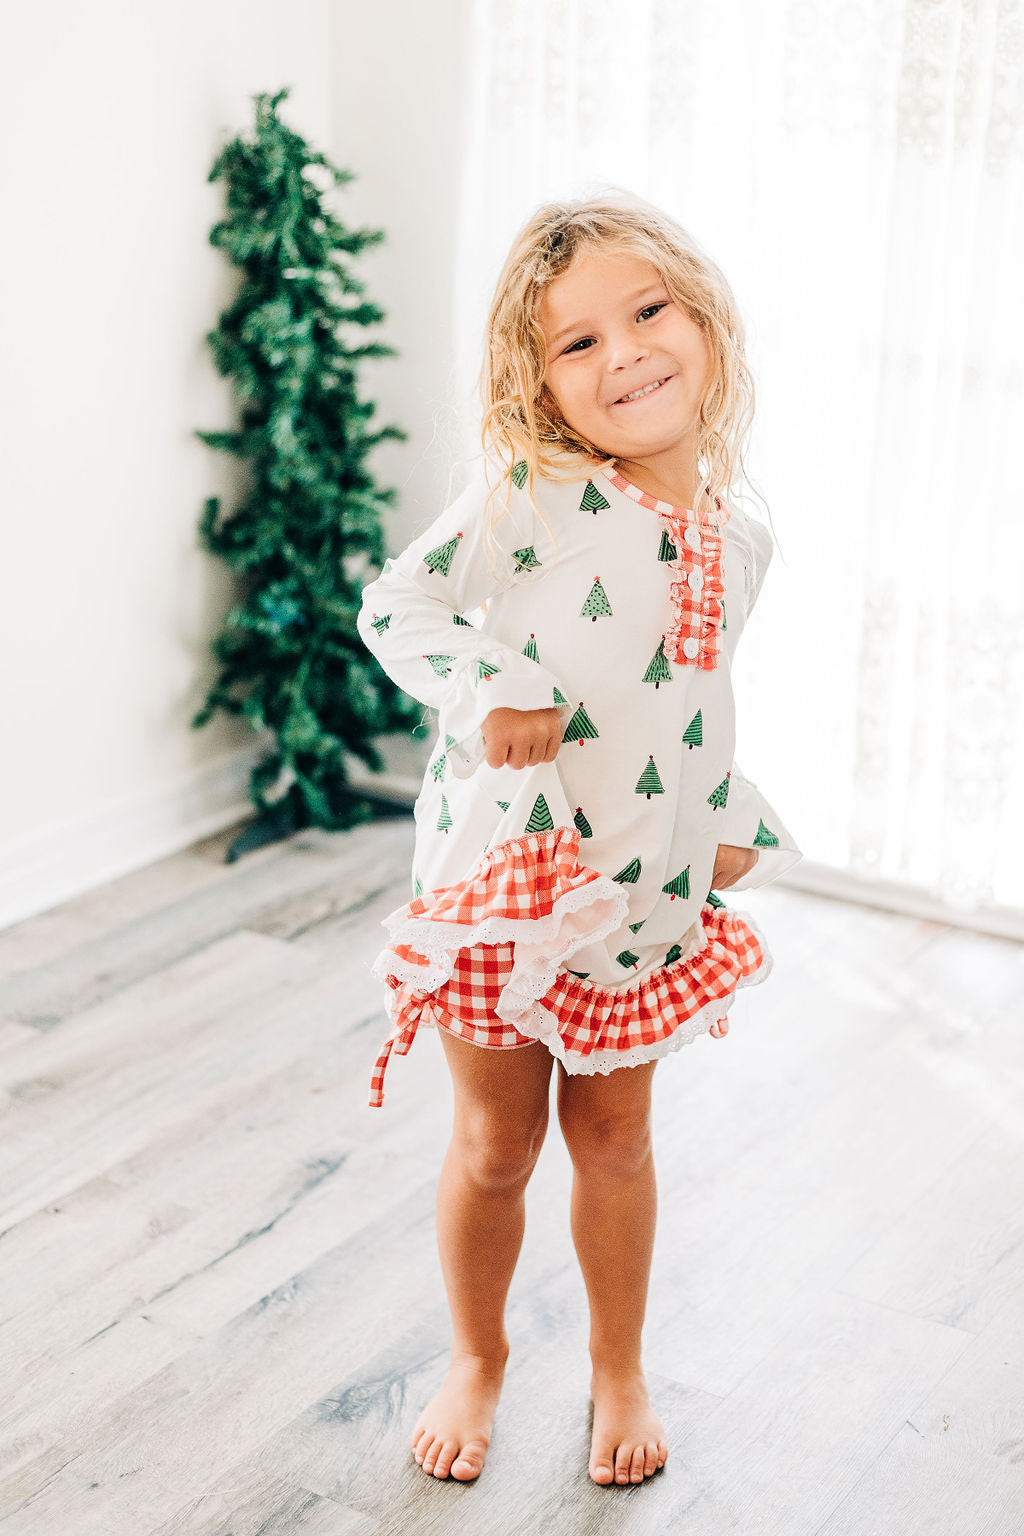 Christmas Tree - Ruffle Gown With Bloomers